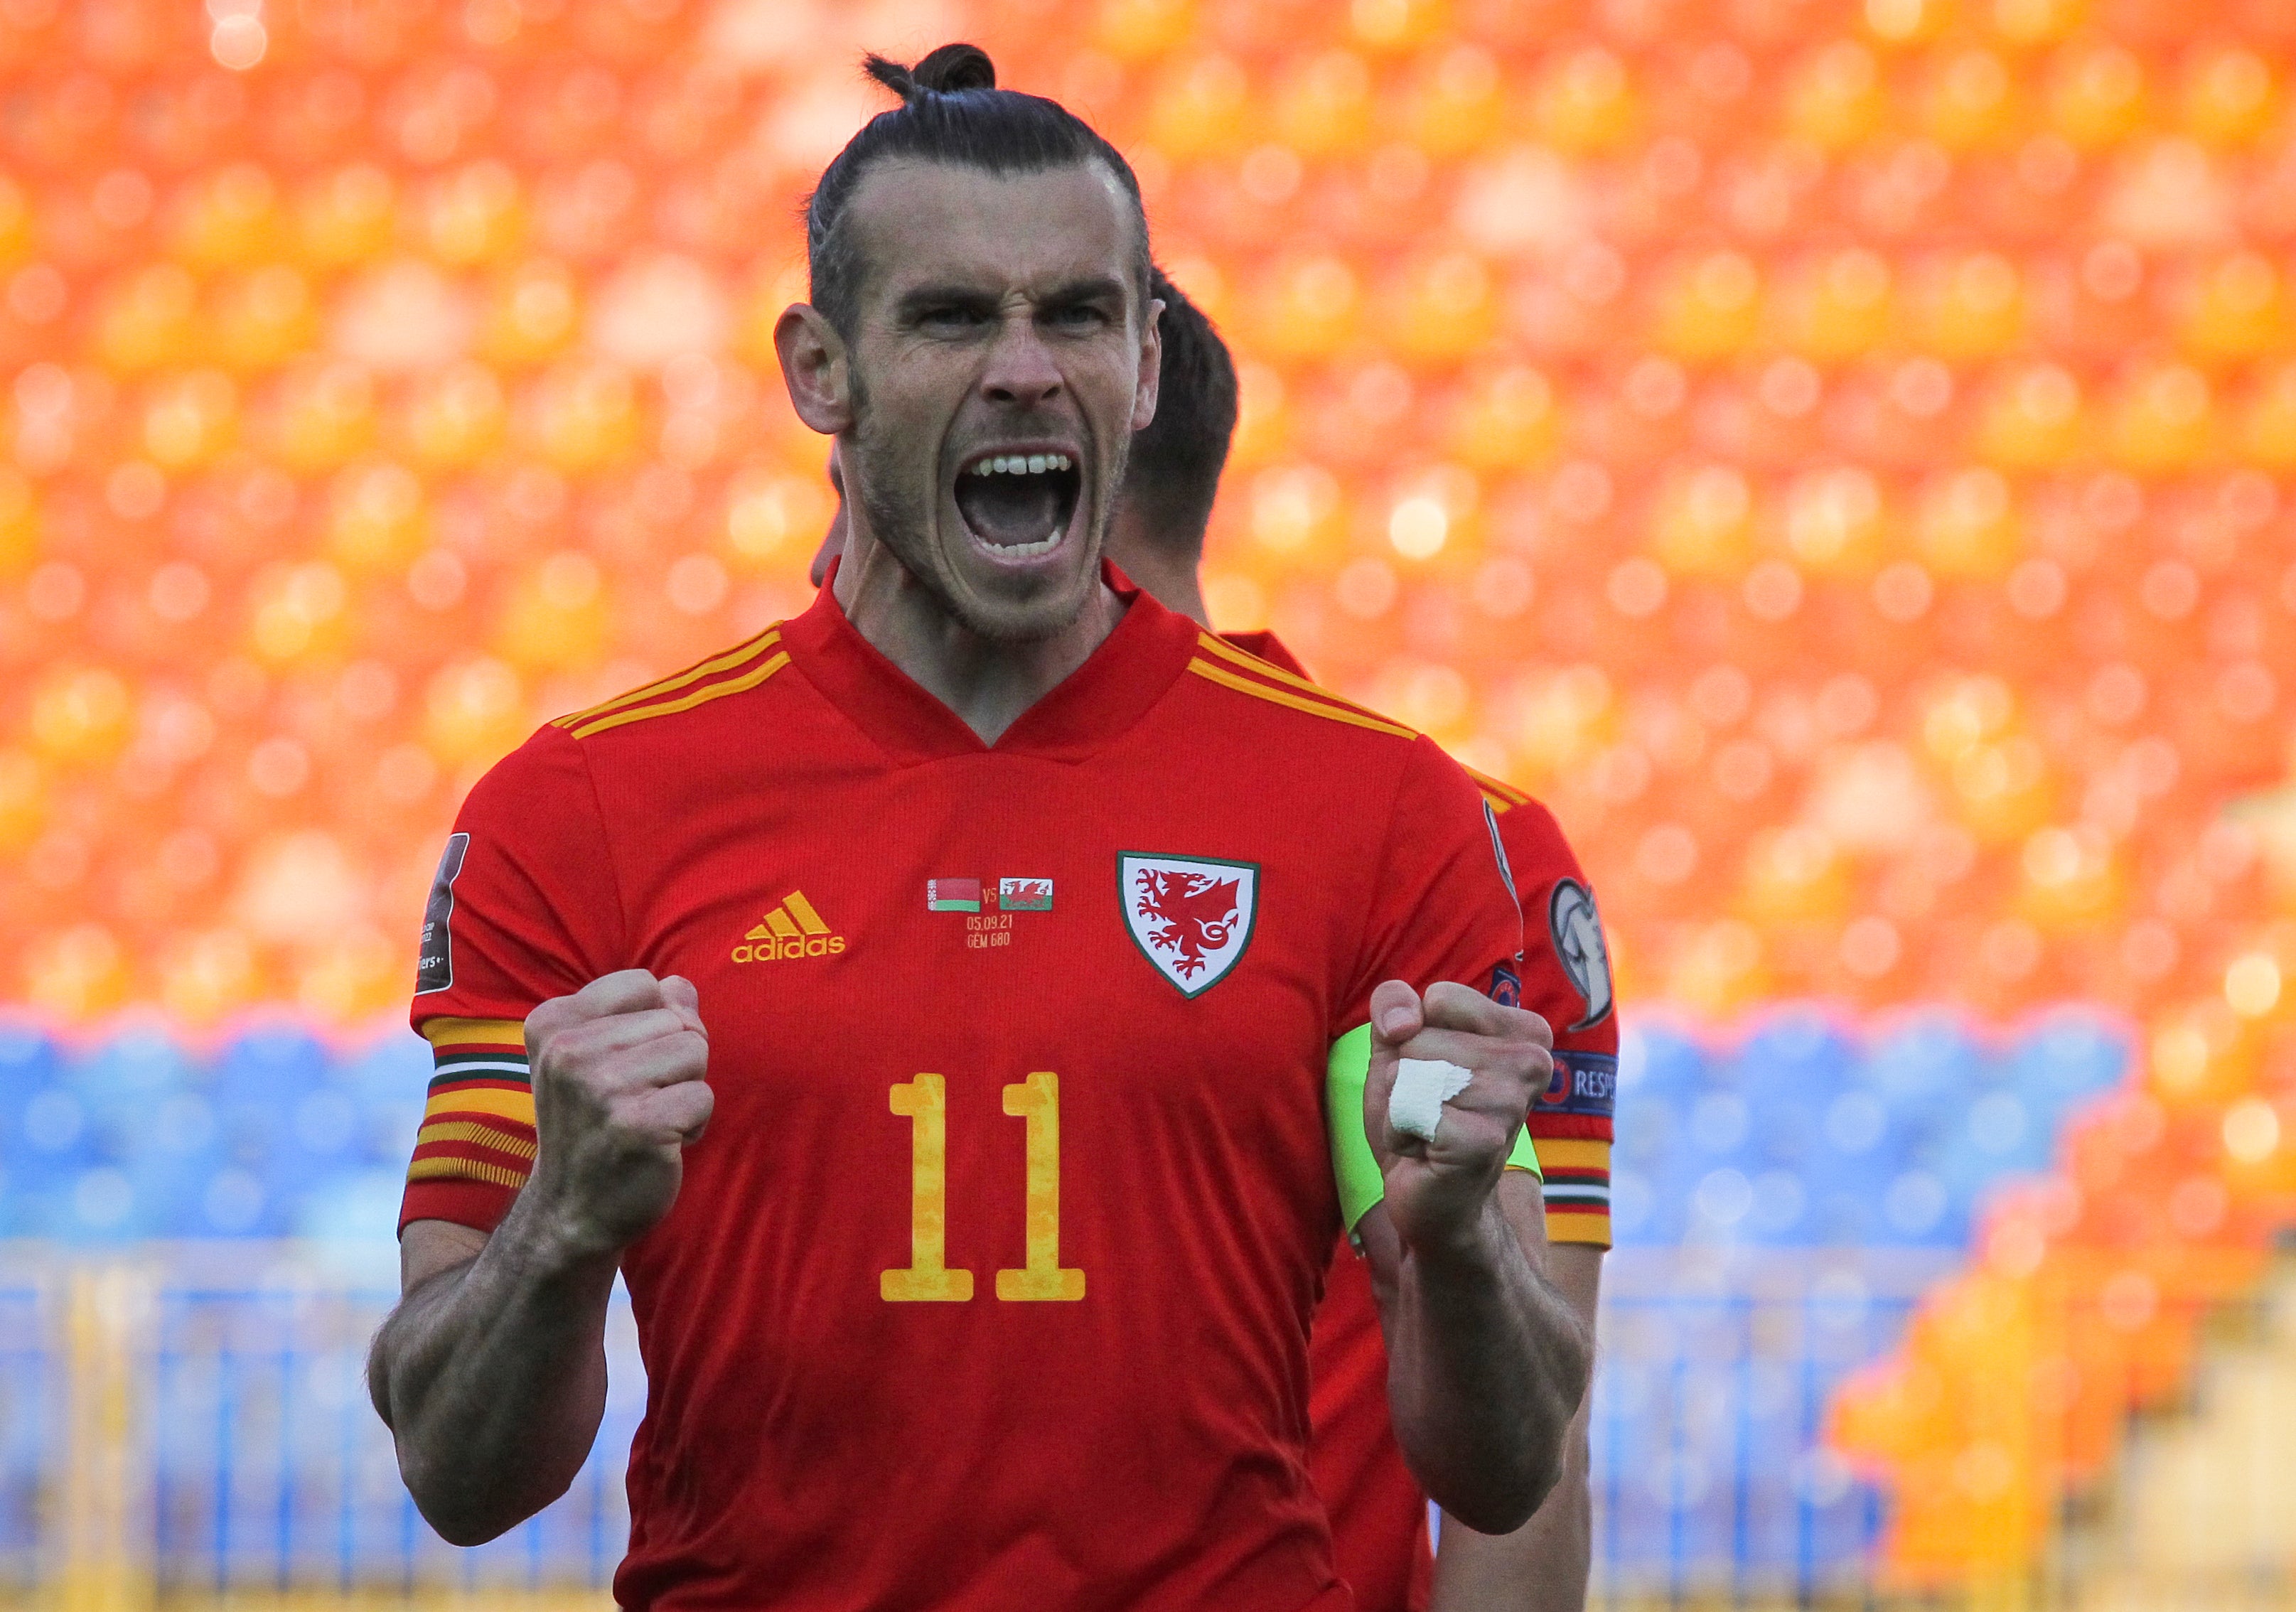 Wales captain Gareth Bale celebrates his side’s World Cup qualifying victory over Belarus (Alexei Nasyrov/AP)